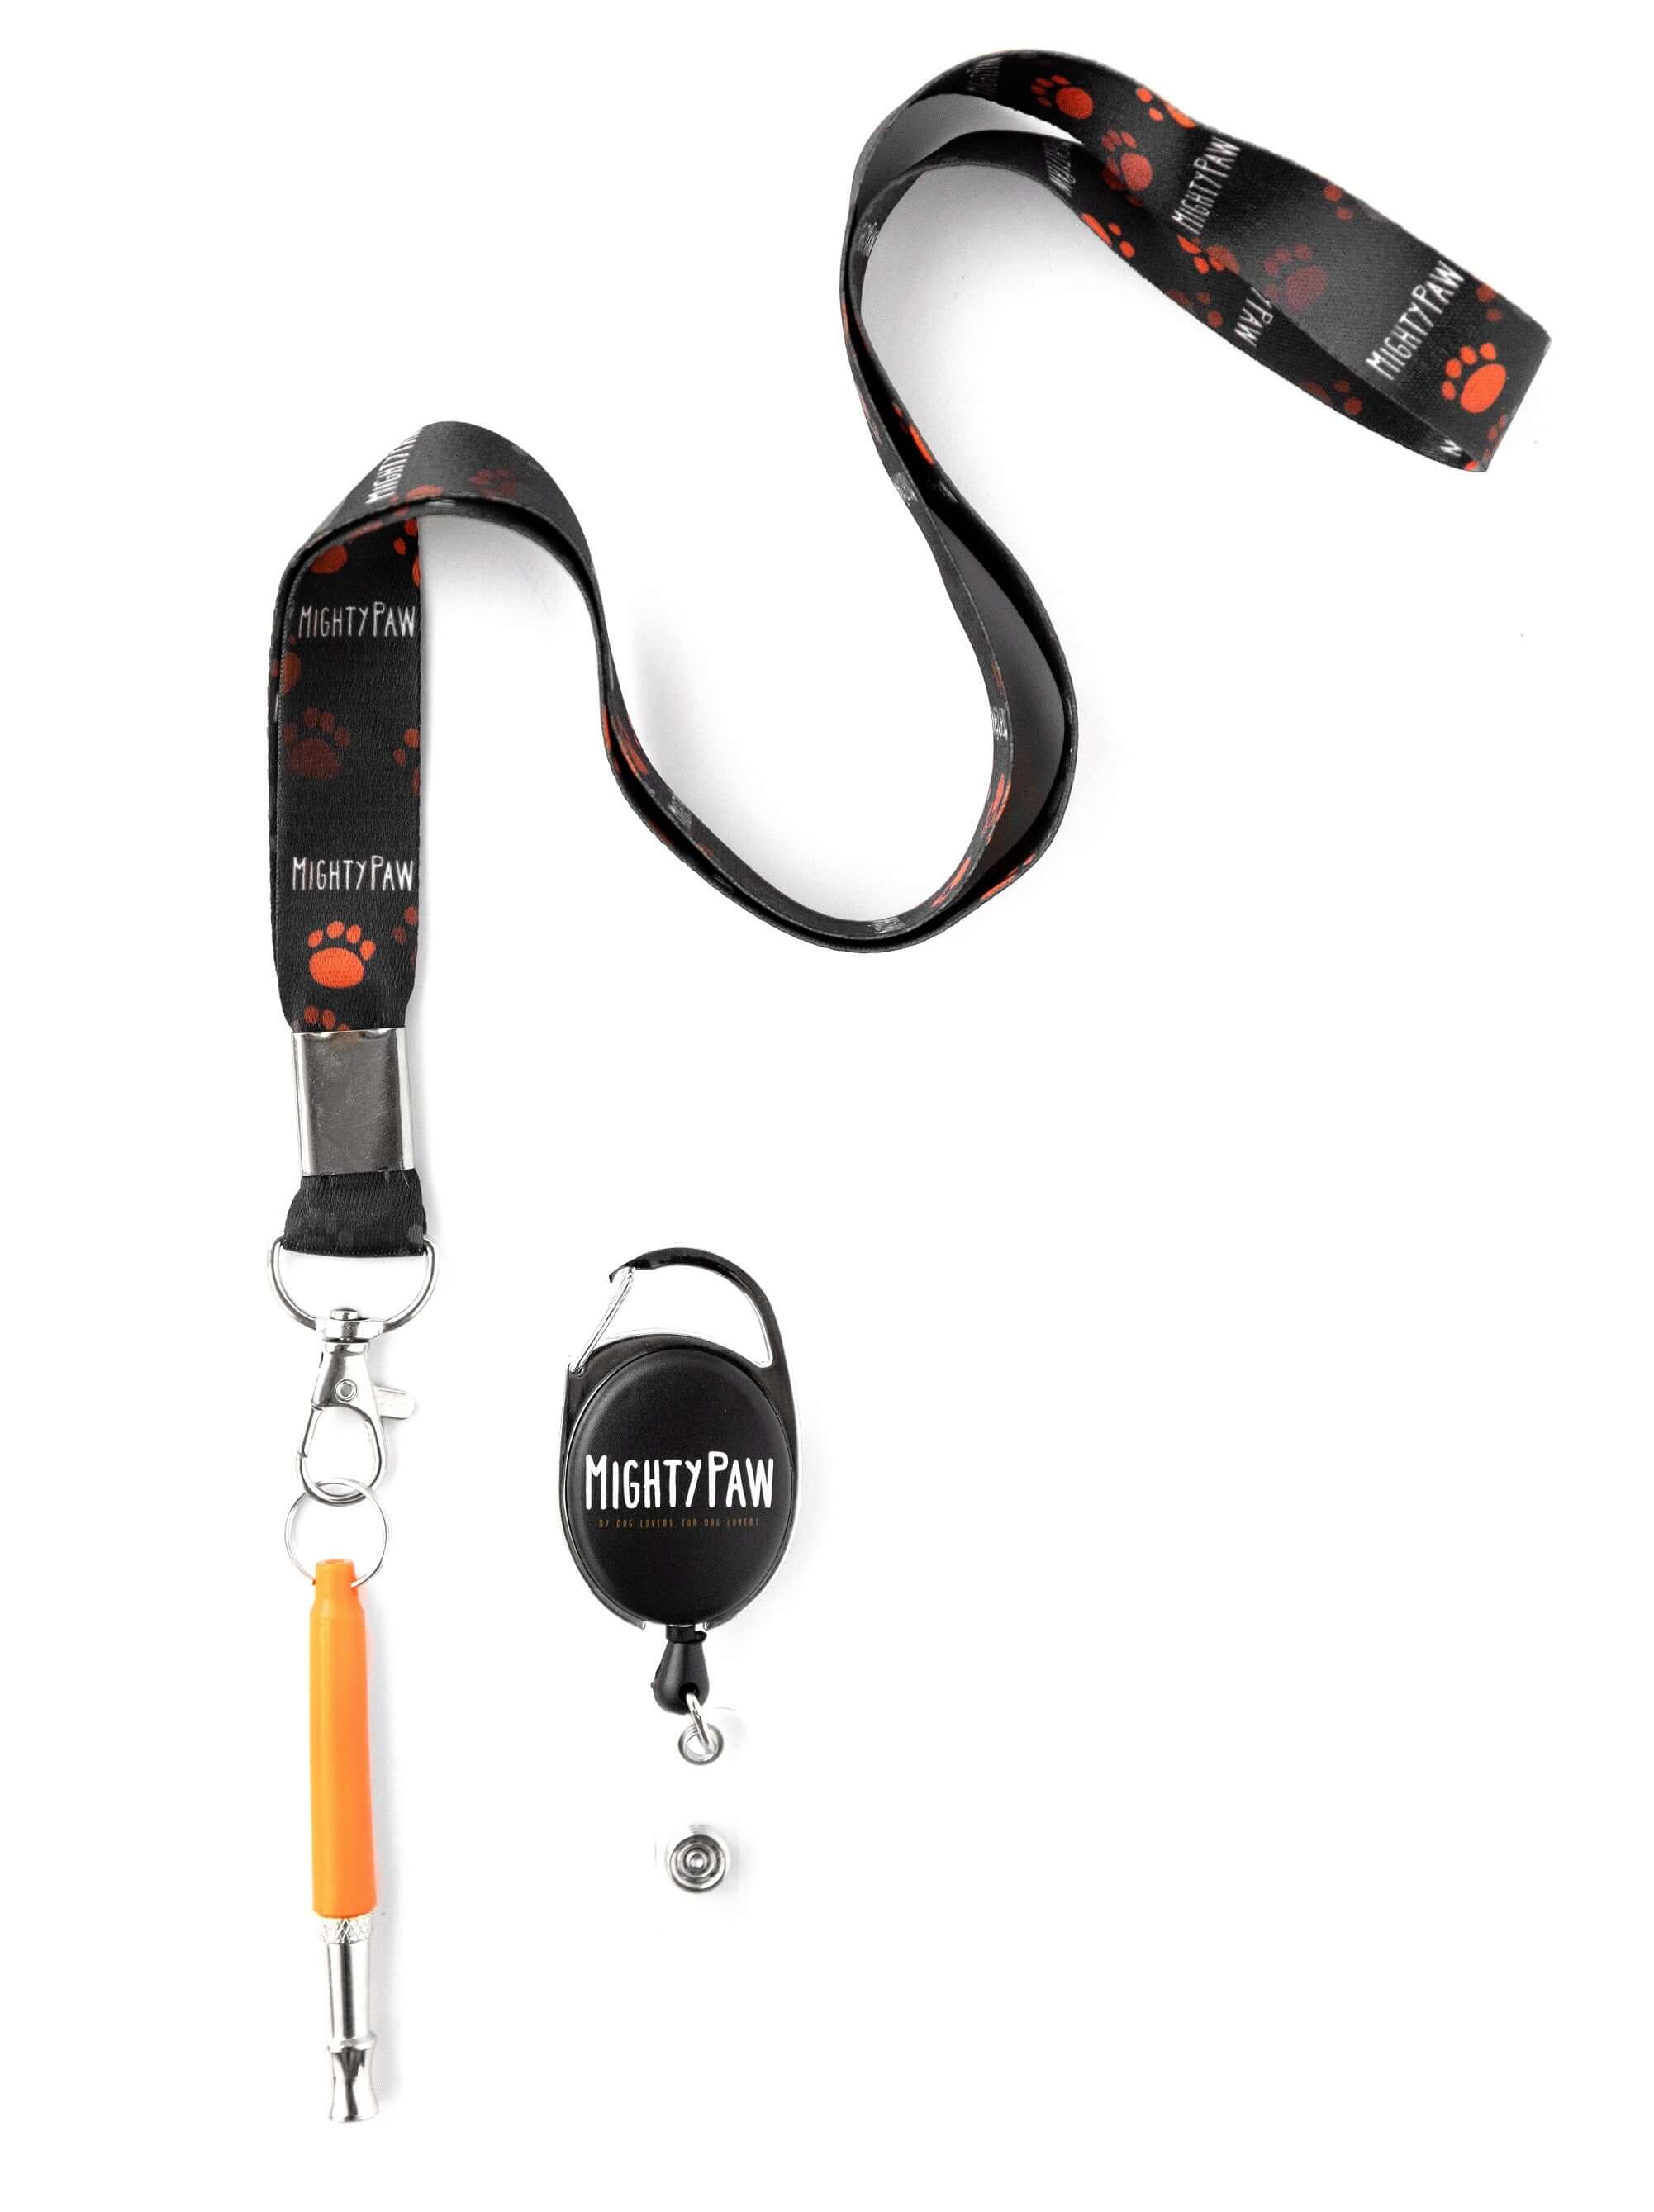 Mighty Paw Dog Training Whistle with Neck Lanyard & Retractable Clip